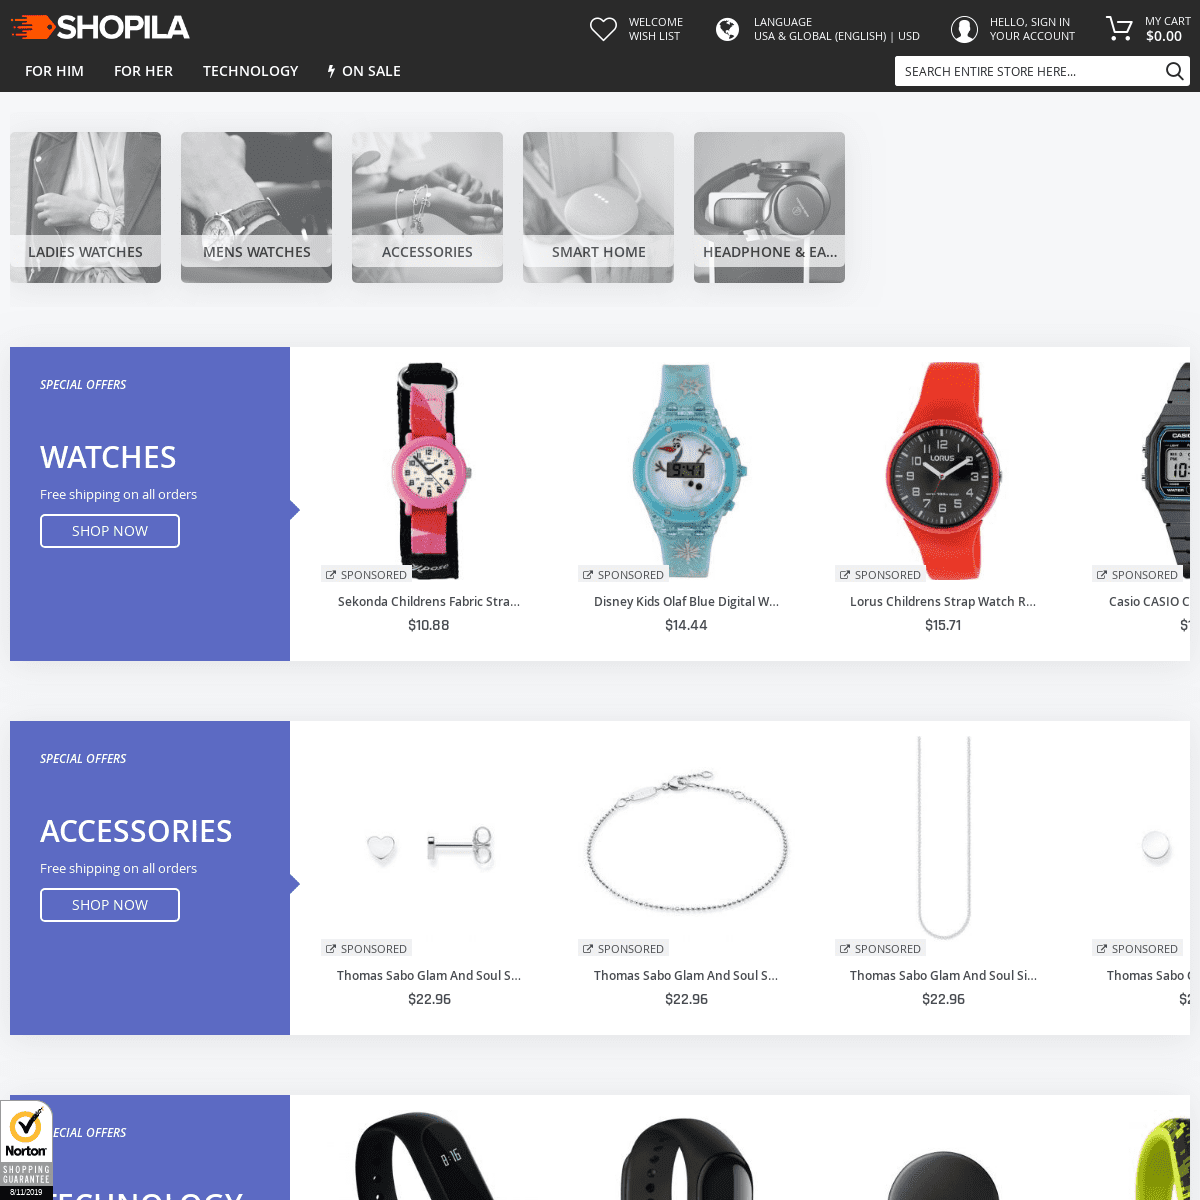 Shopila - Watches, Accessories, Home & Kitchen and more...